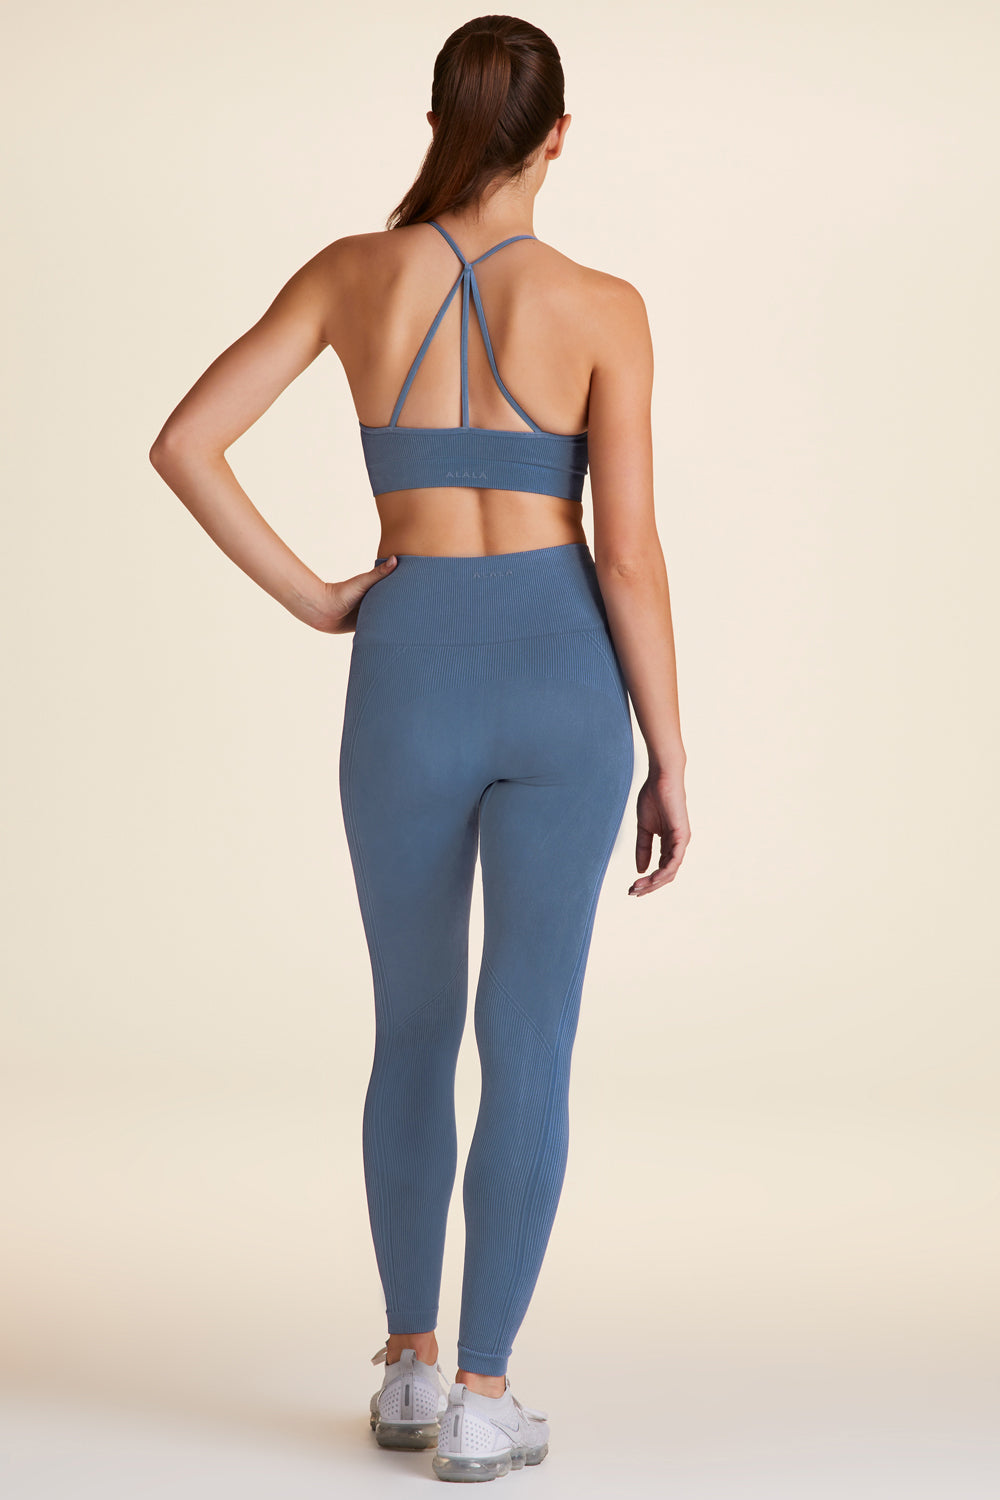 Full body back view of Alala Luxury Women's Athleisure blue barre bra with cross over back strap detailing